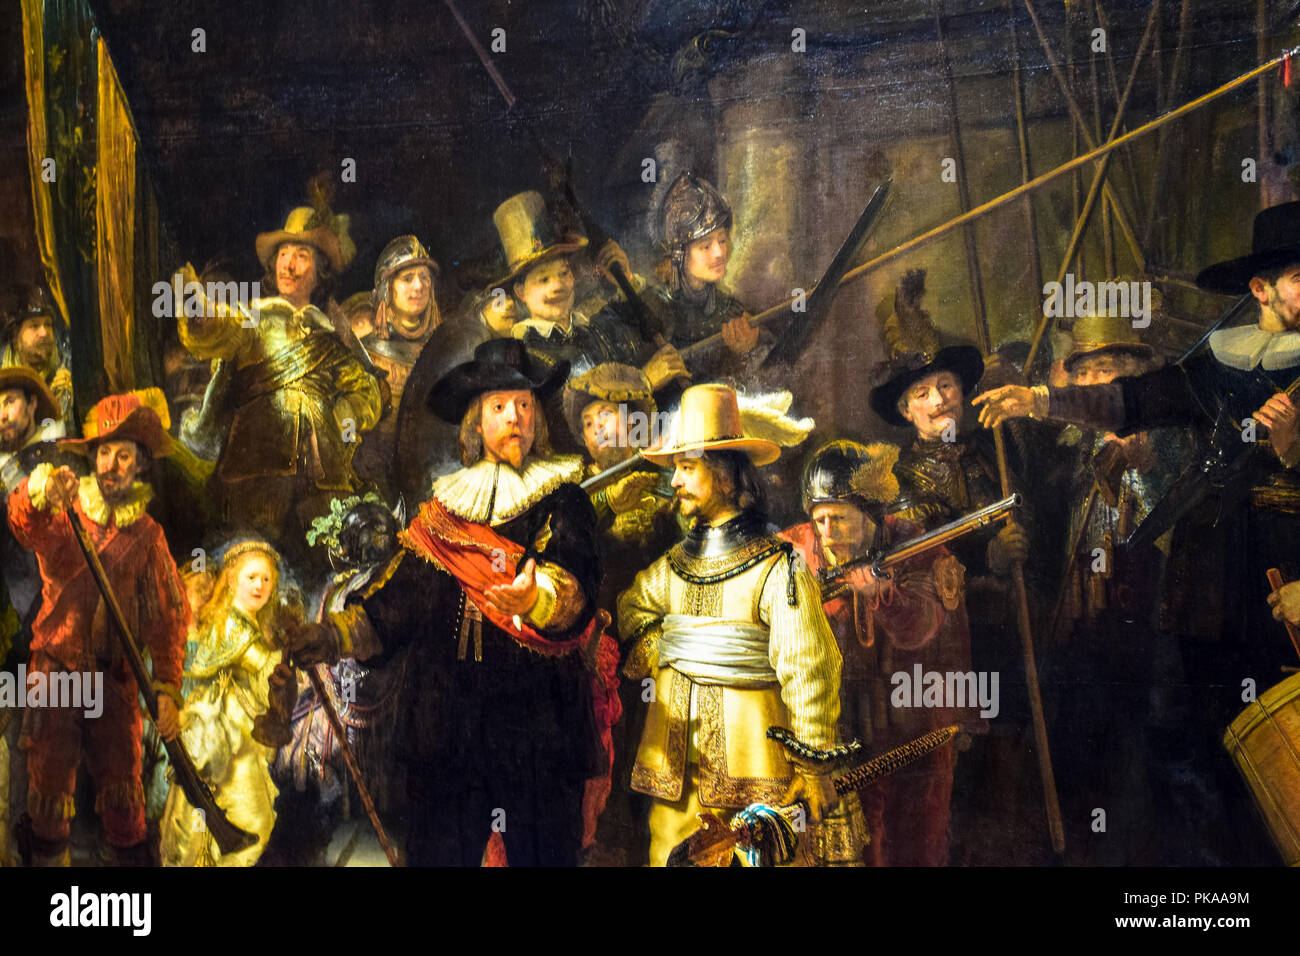 The iconic masterwork 'The Night Watch' by Rembrandt Van Rijn in the Rijksmuseum in Amsterdam, Netherlands Stock Photo